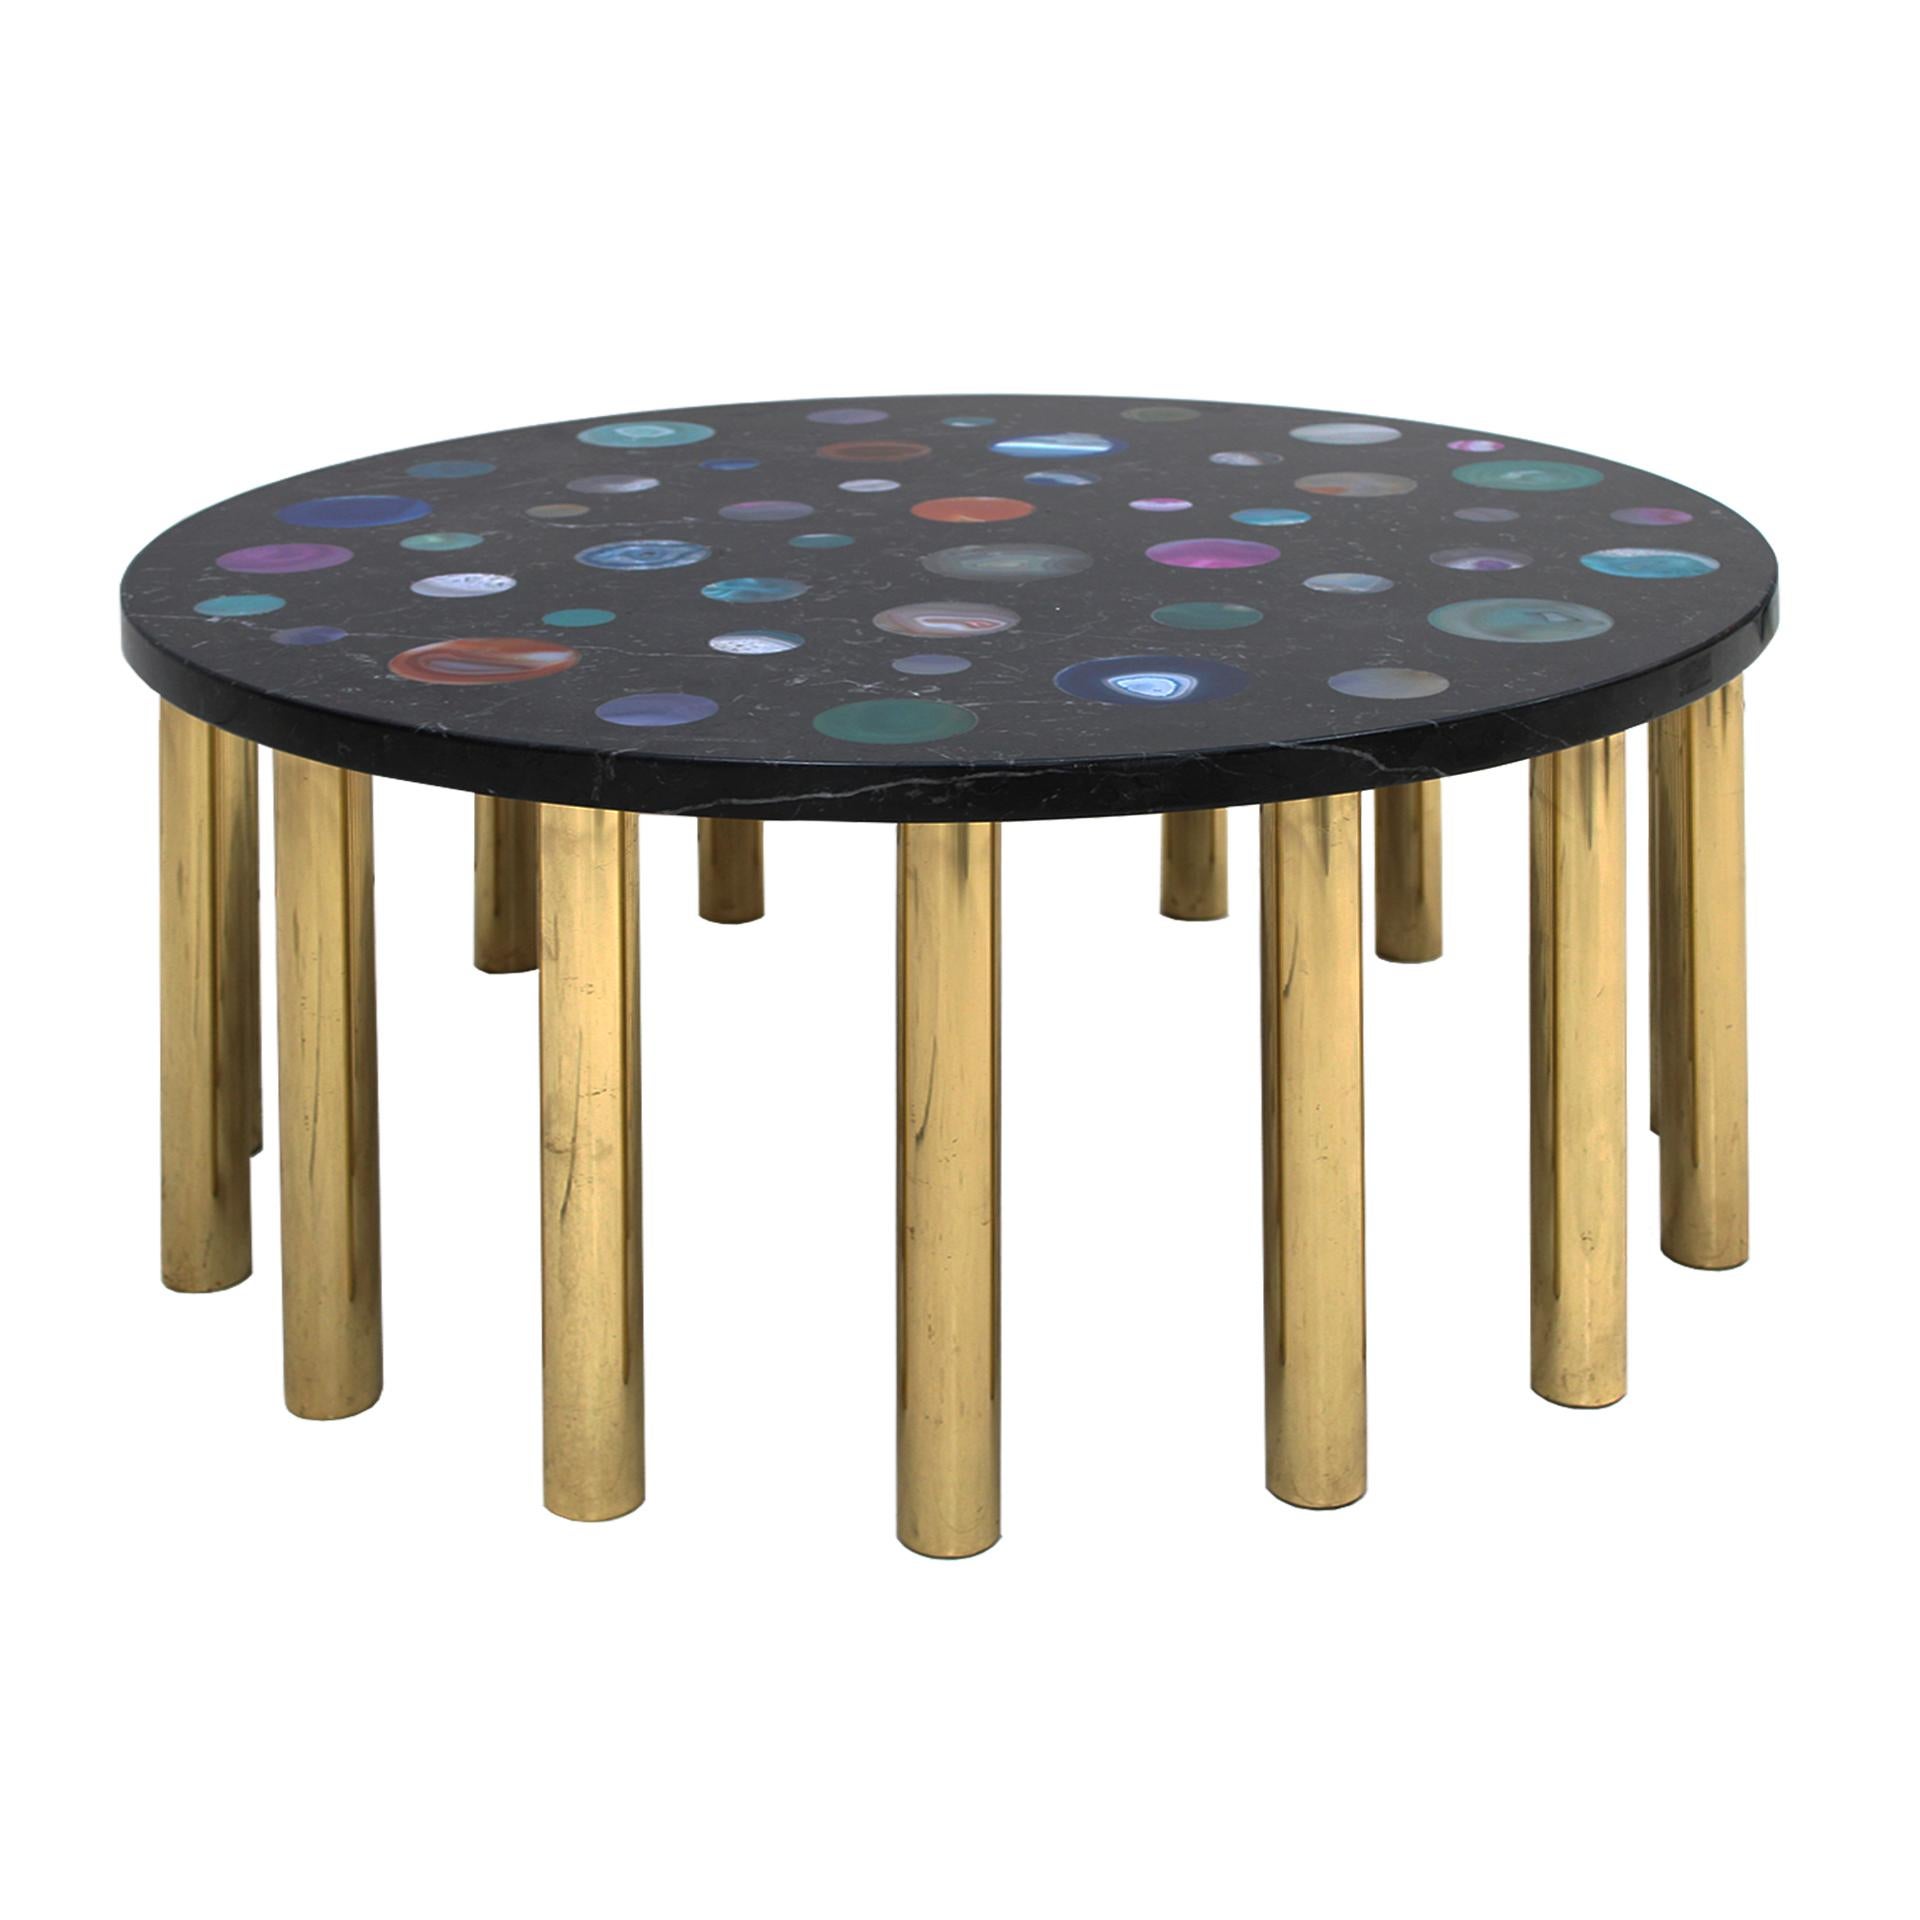 Coffee table designed by Studio Superego, made in black Marquina marble with agates of different colors and with brass legs. Single edition.

Agates are natural stones and therefore may have some imperfection, color variation and